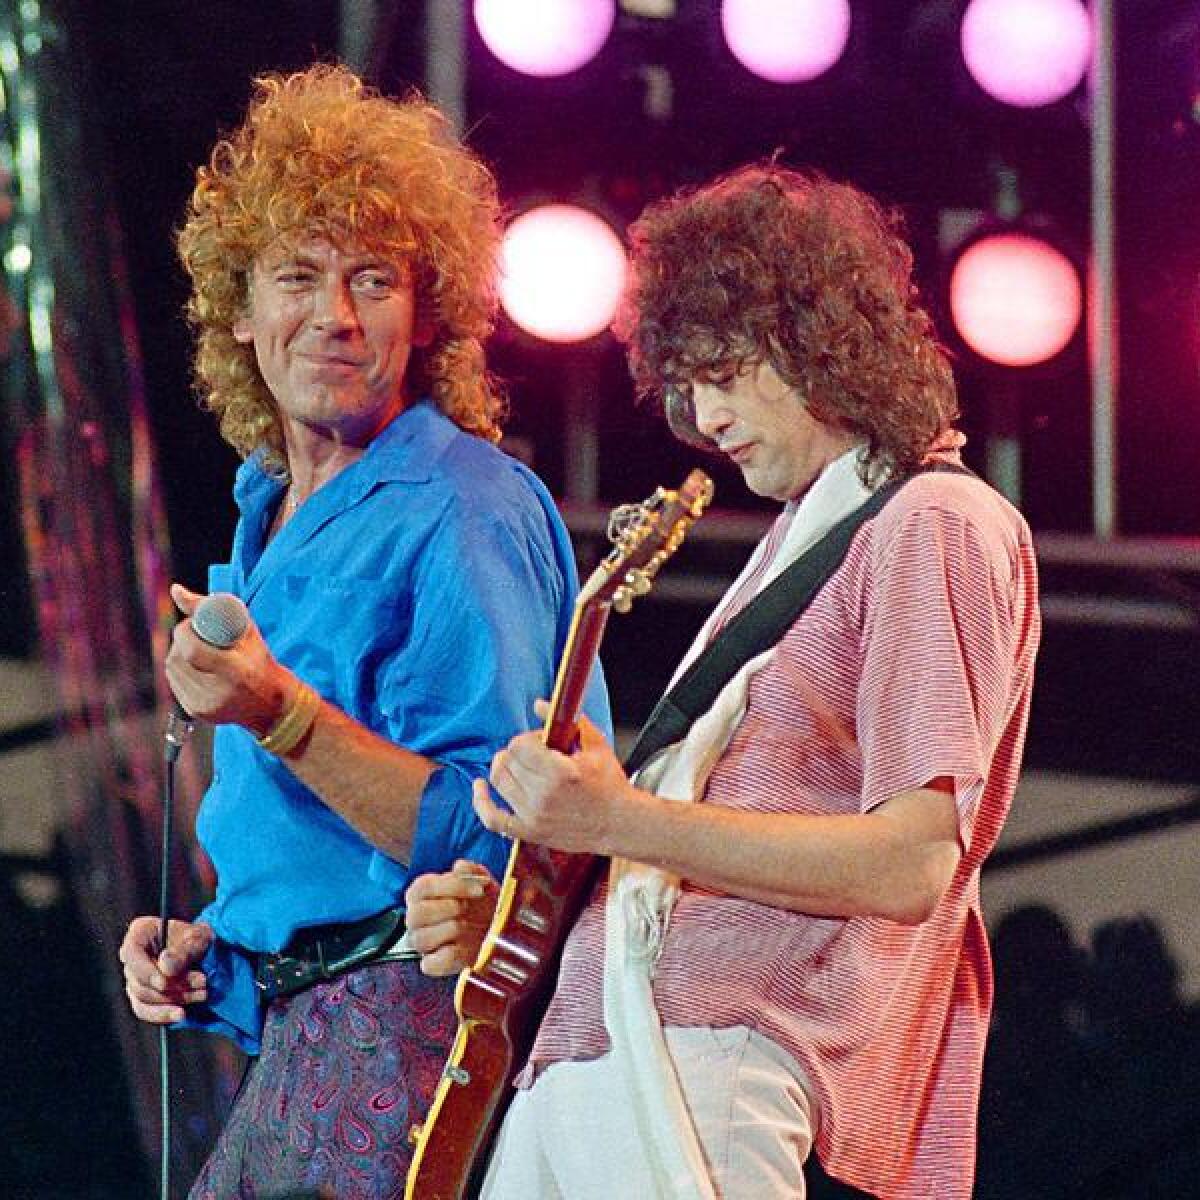 Robert Plant and Jimmy Page performing in 1985 